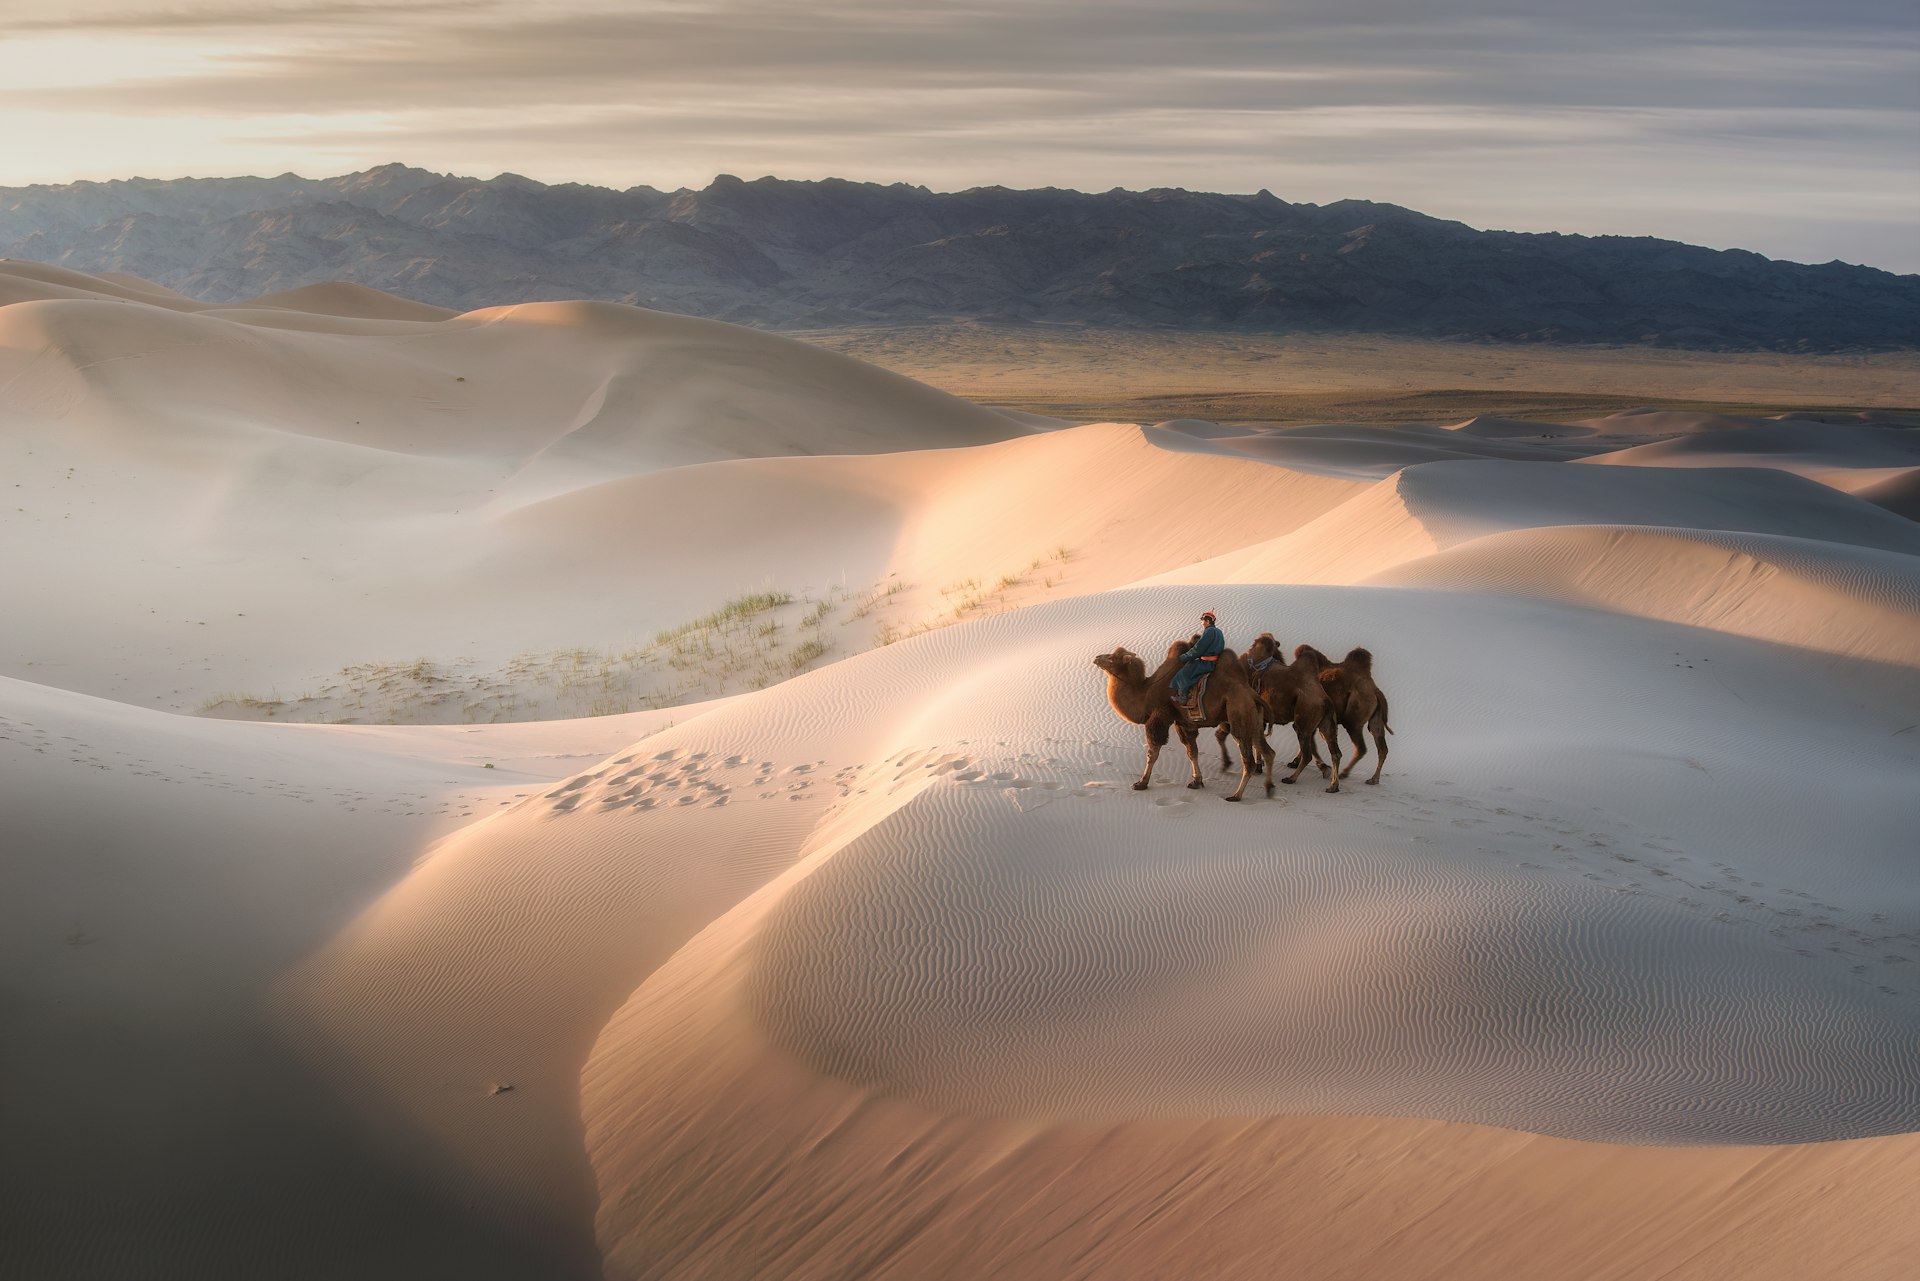 A man leads two others on a camel across the dunes